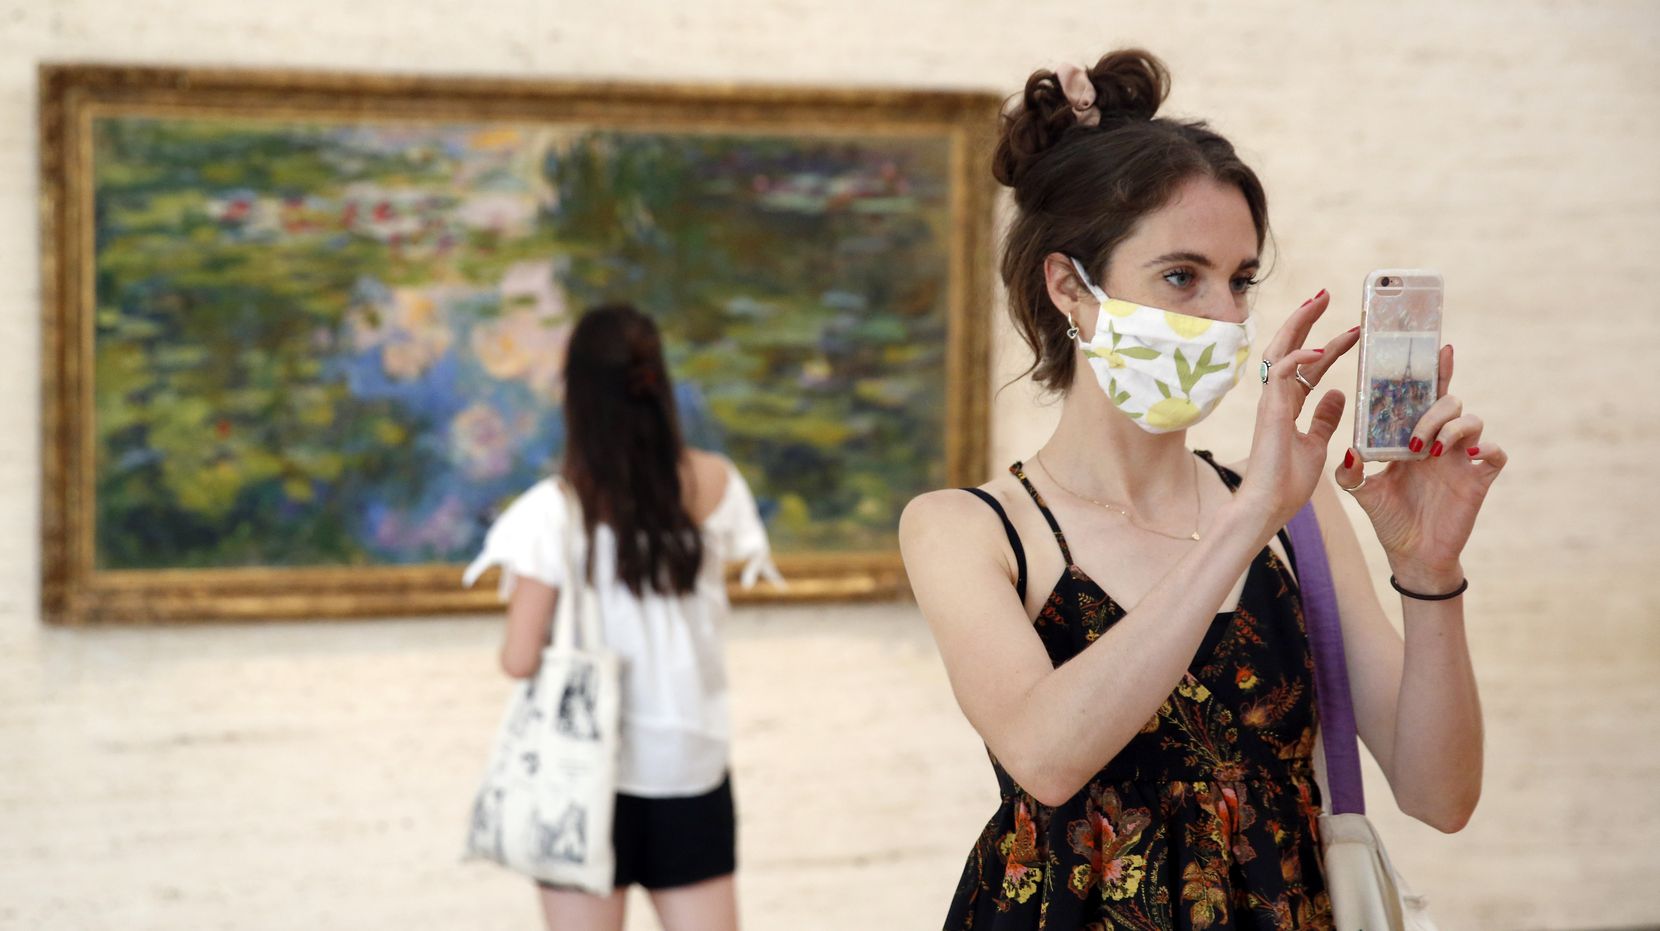 Libby Krueger of Fort Worth takes a photo of paintings in the Kimbell Art Museum as her friend Kimberly Brubacher of Los Angeles views Claude Monet's Water-Lily Pond (1917-19) in Fort Worth, July 14, 2020. 